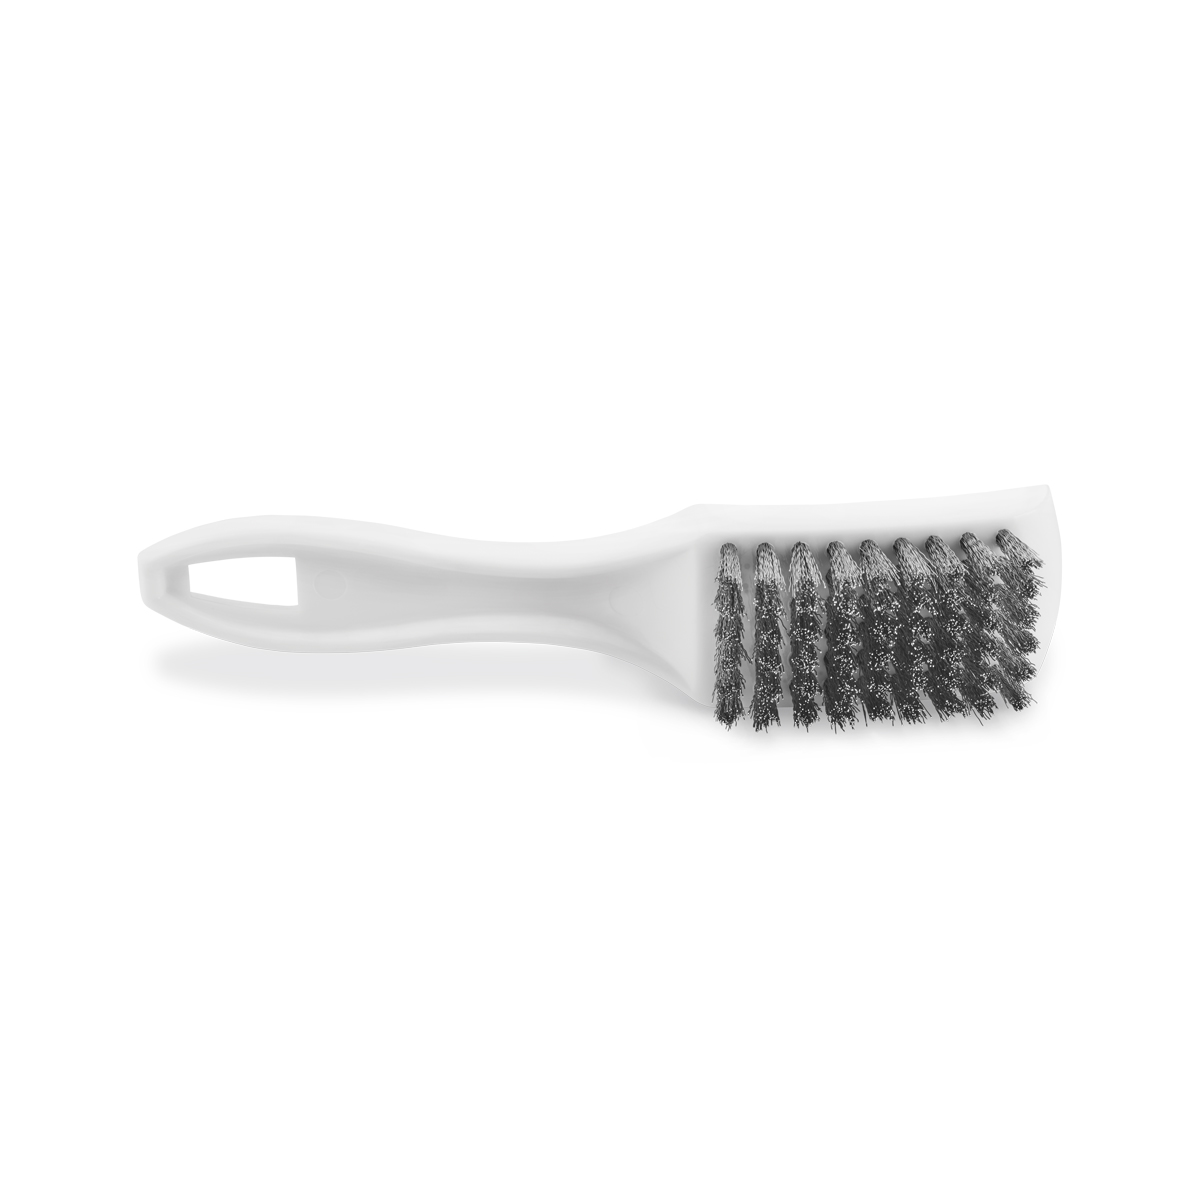 General Instrument Cleaning Brush Image